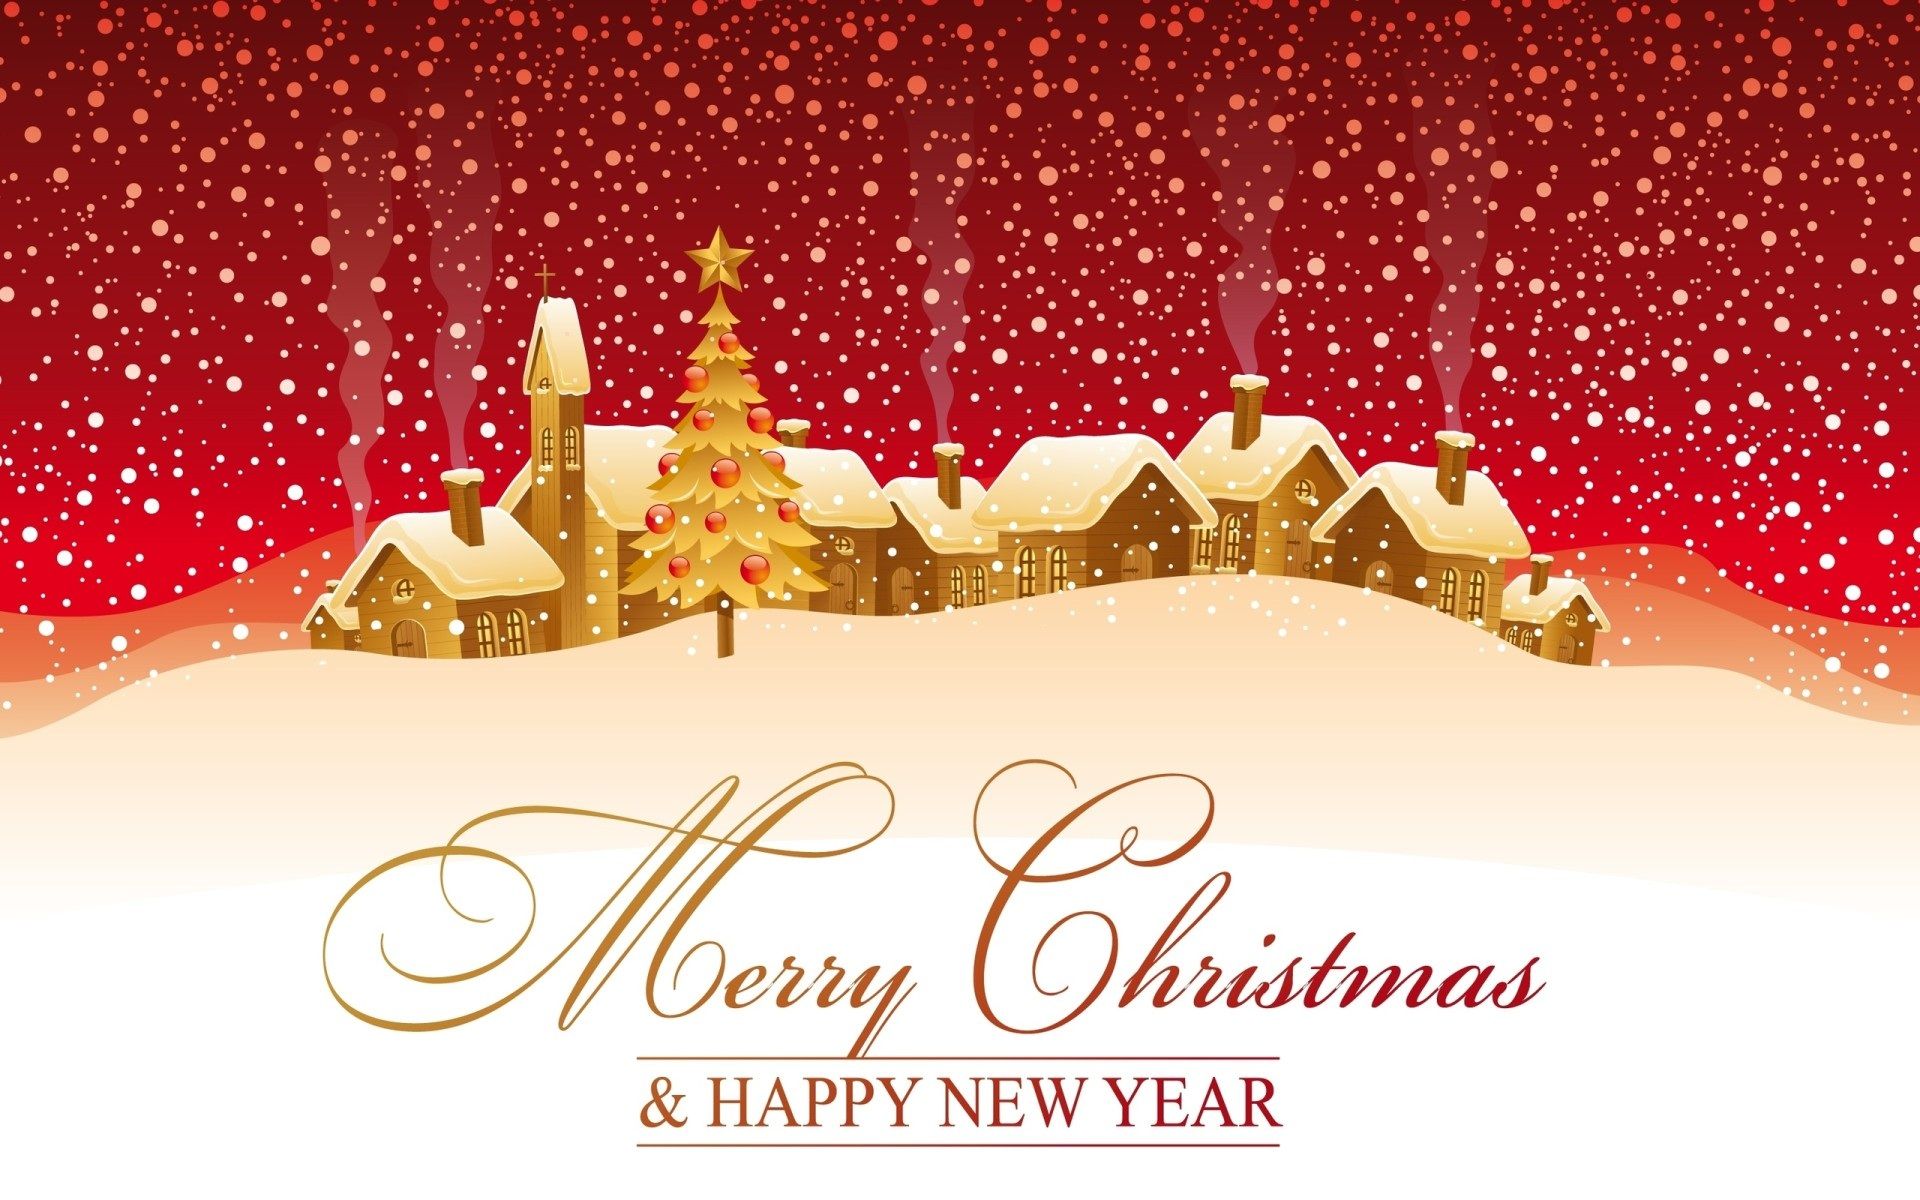 Merry Christmas and Happy New Year. Merry christmas card greetings, Merry christmas wallpaper, Happy new year wallpaper